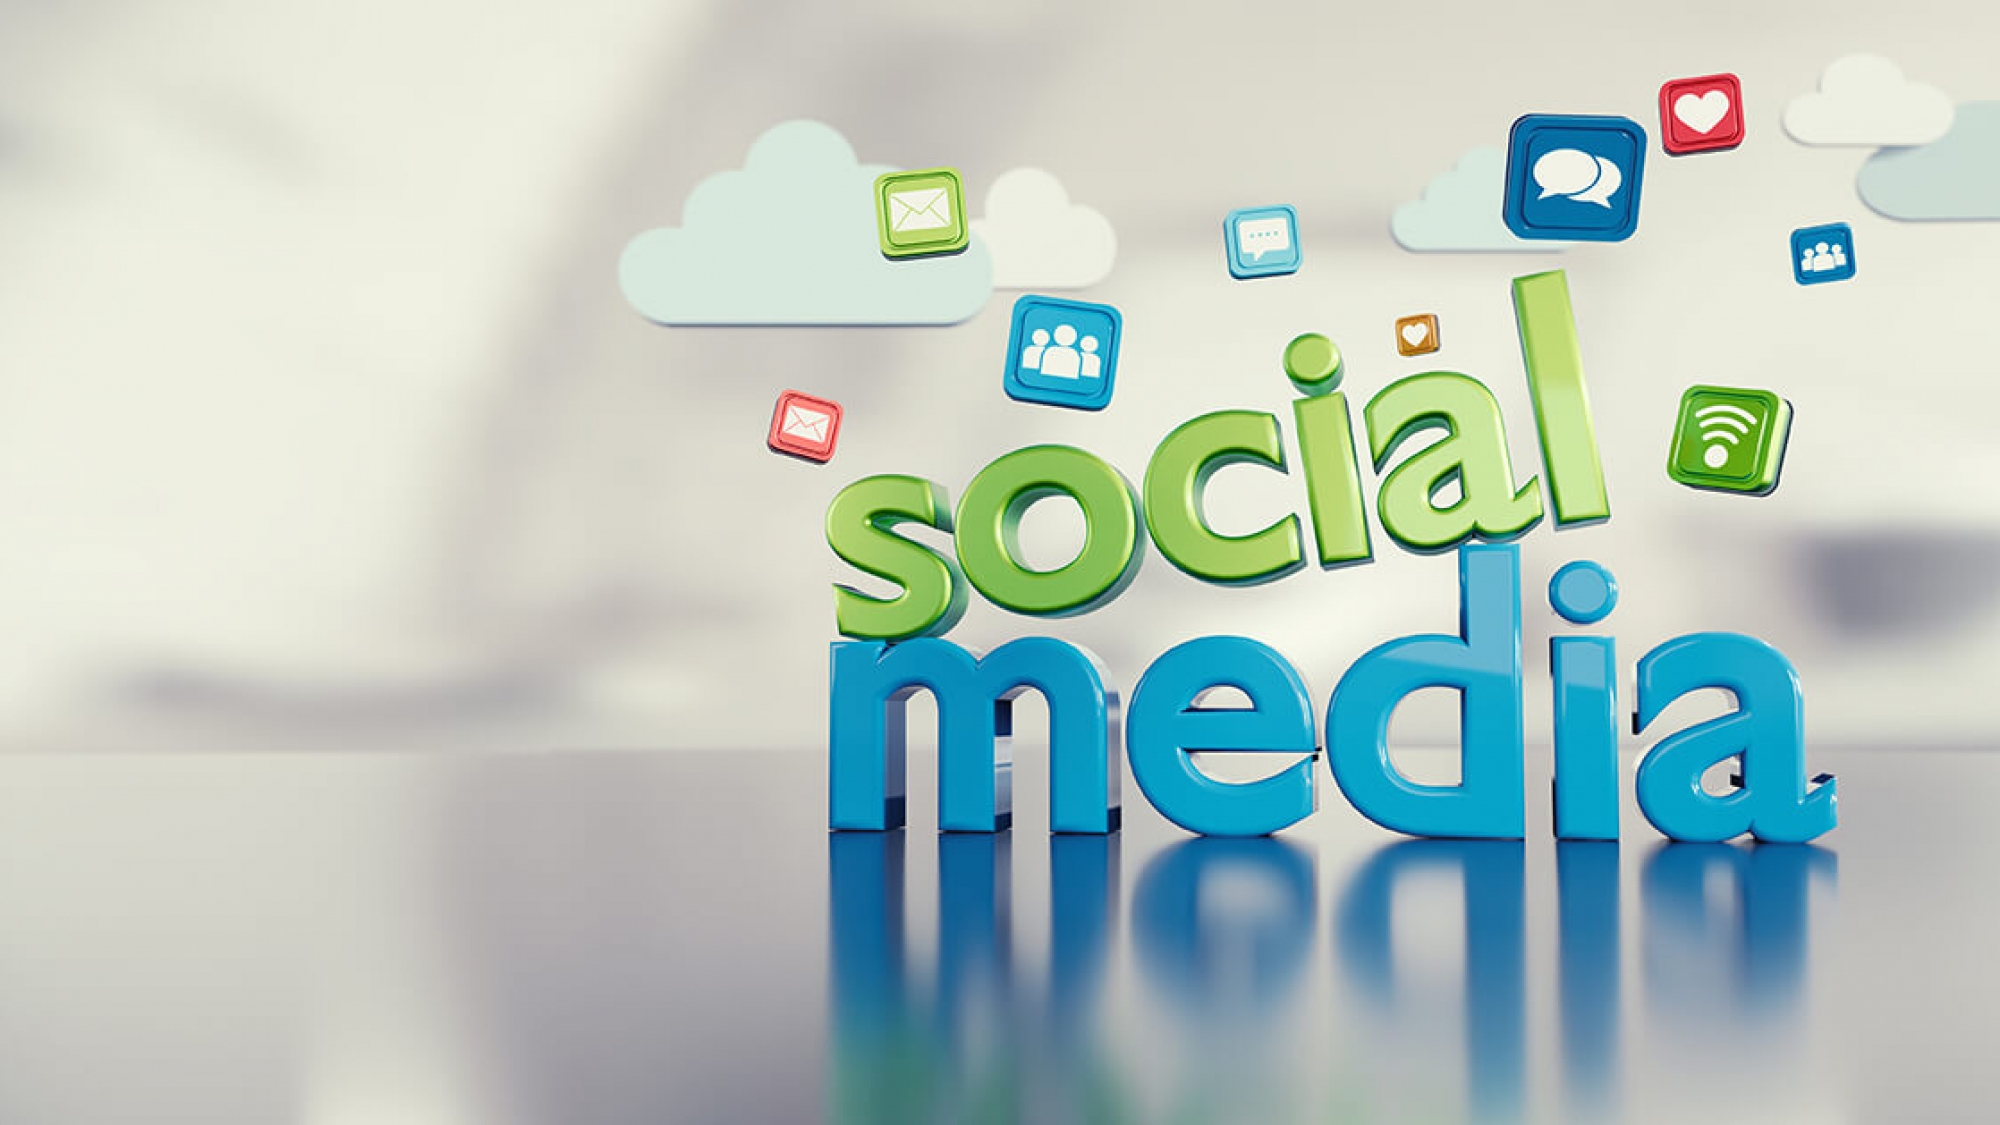 What is social media marketing?